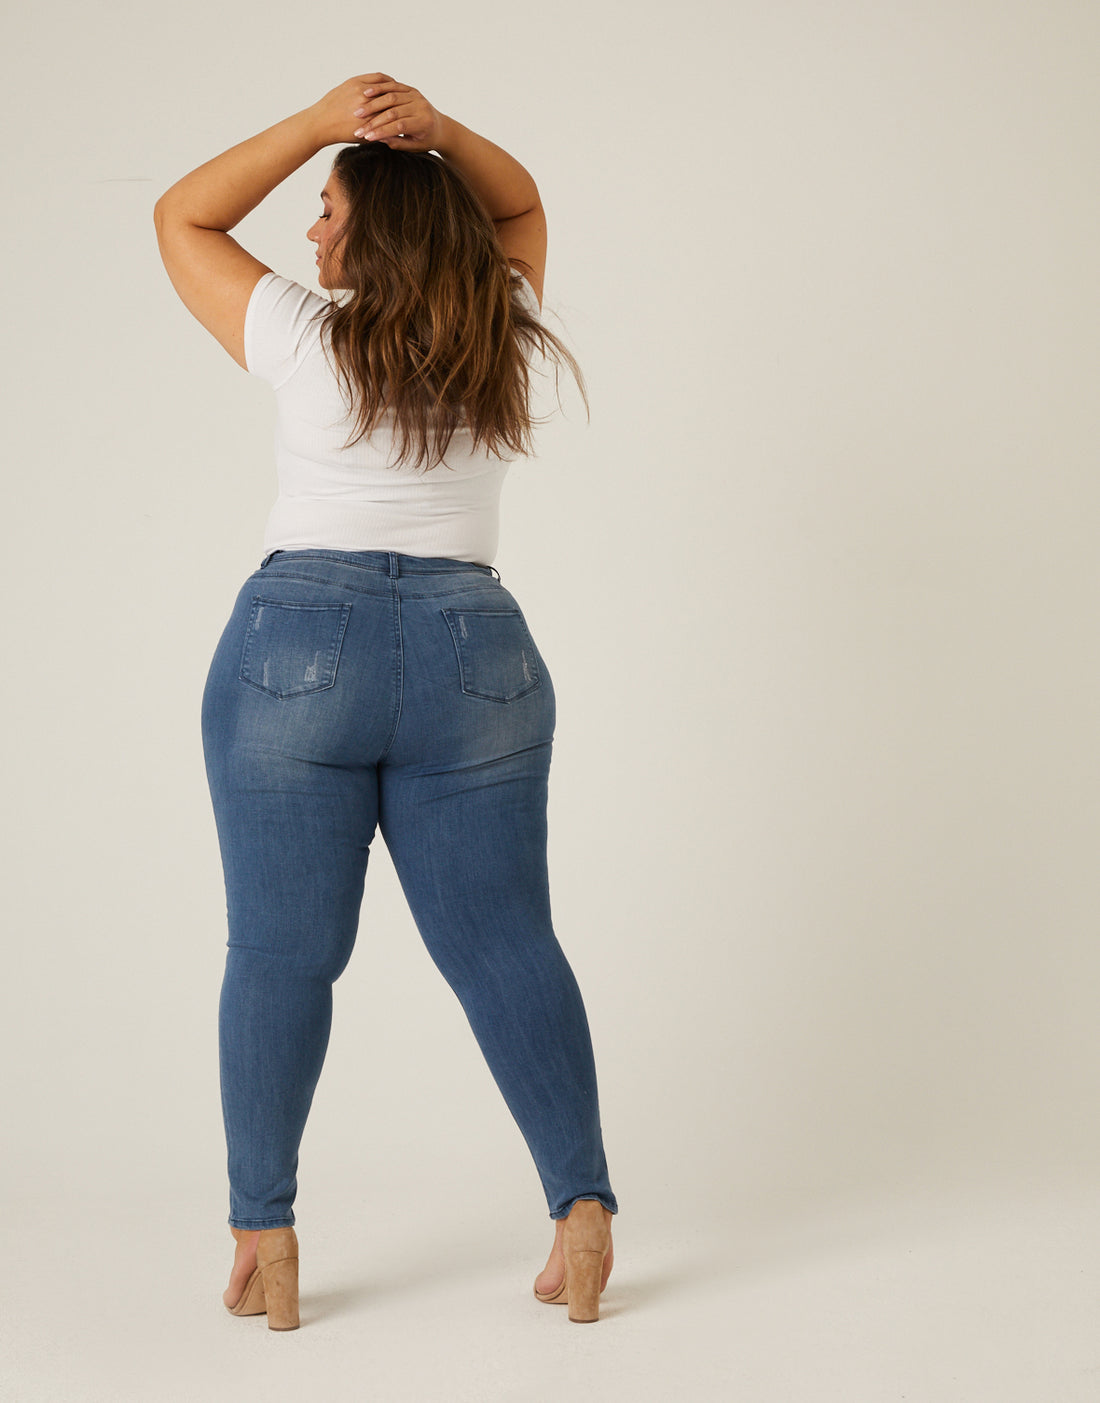 Curve Distressed Skinny Jeans Plus Size Bottoms -2020AVE